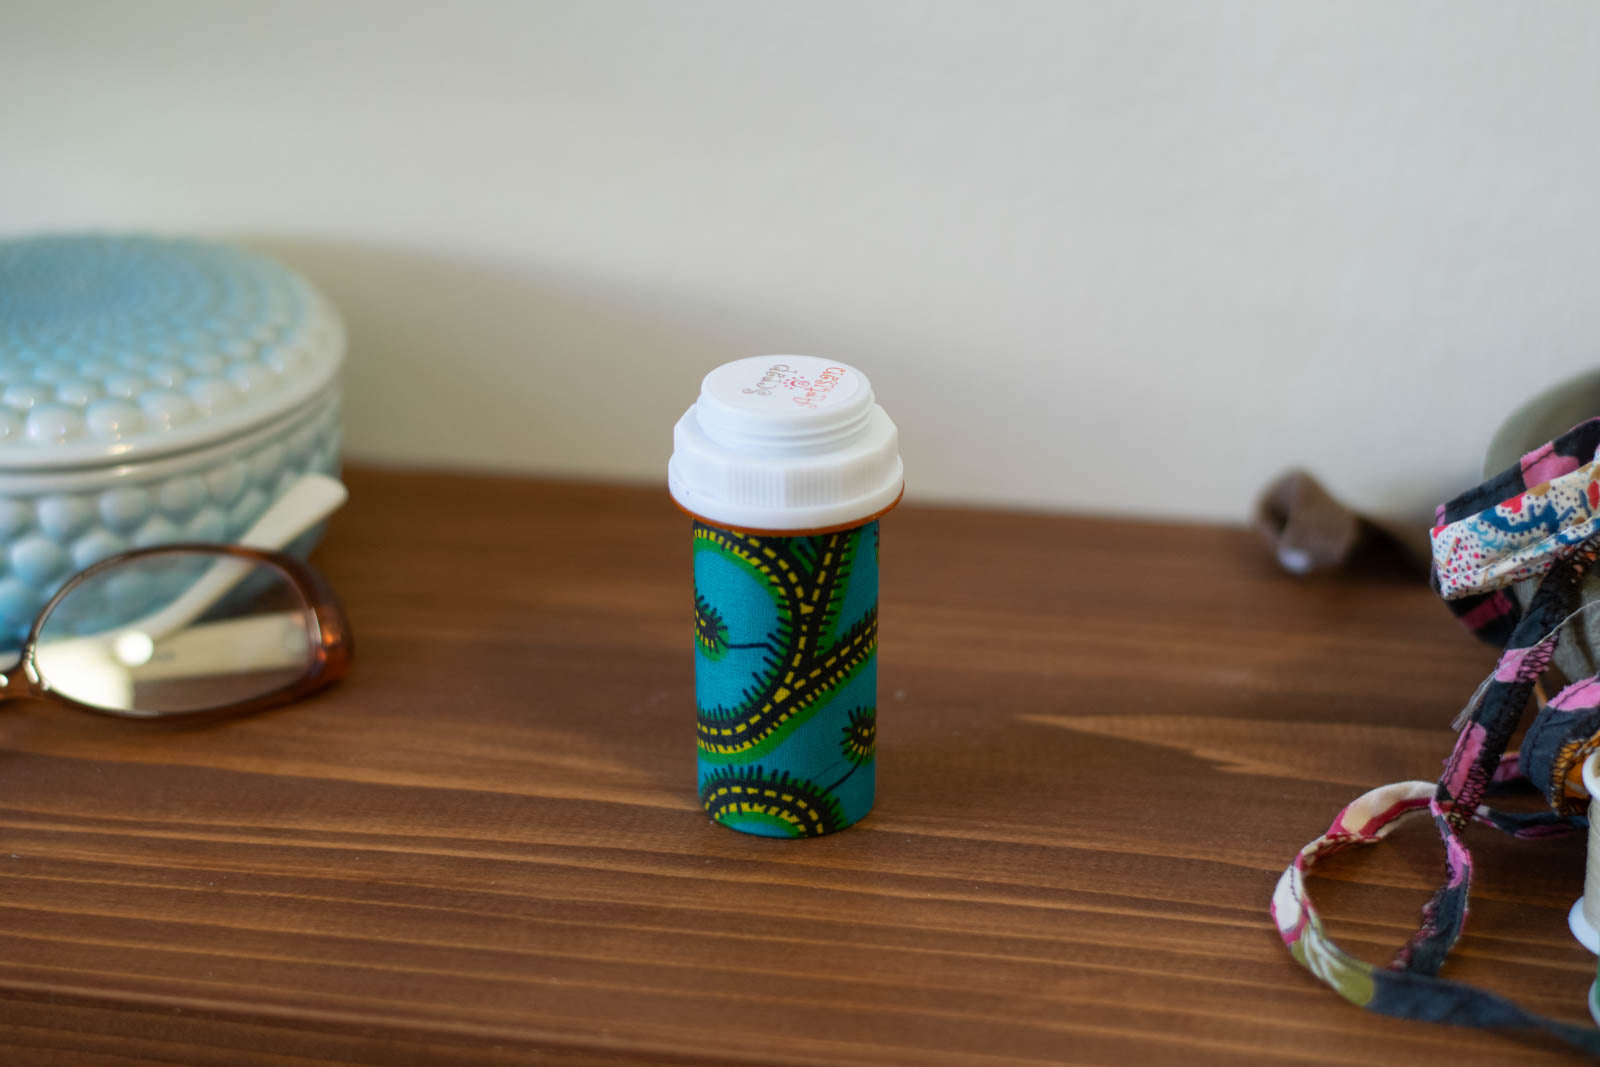 Upcycled Prescription Bottle Sewing Kit — Teal African Wax Print, 3.25" high, closed